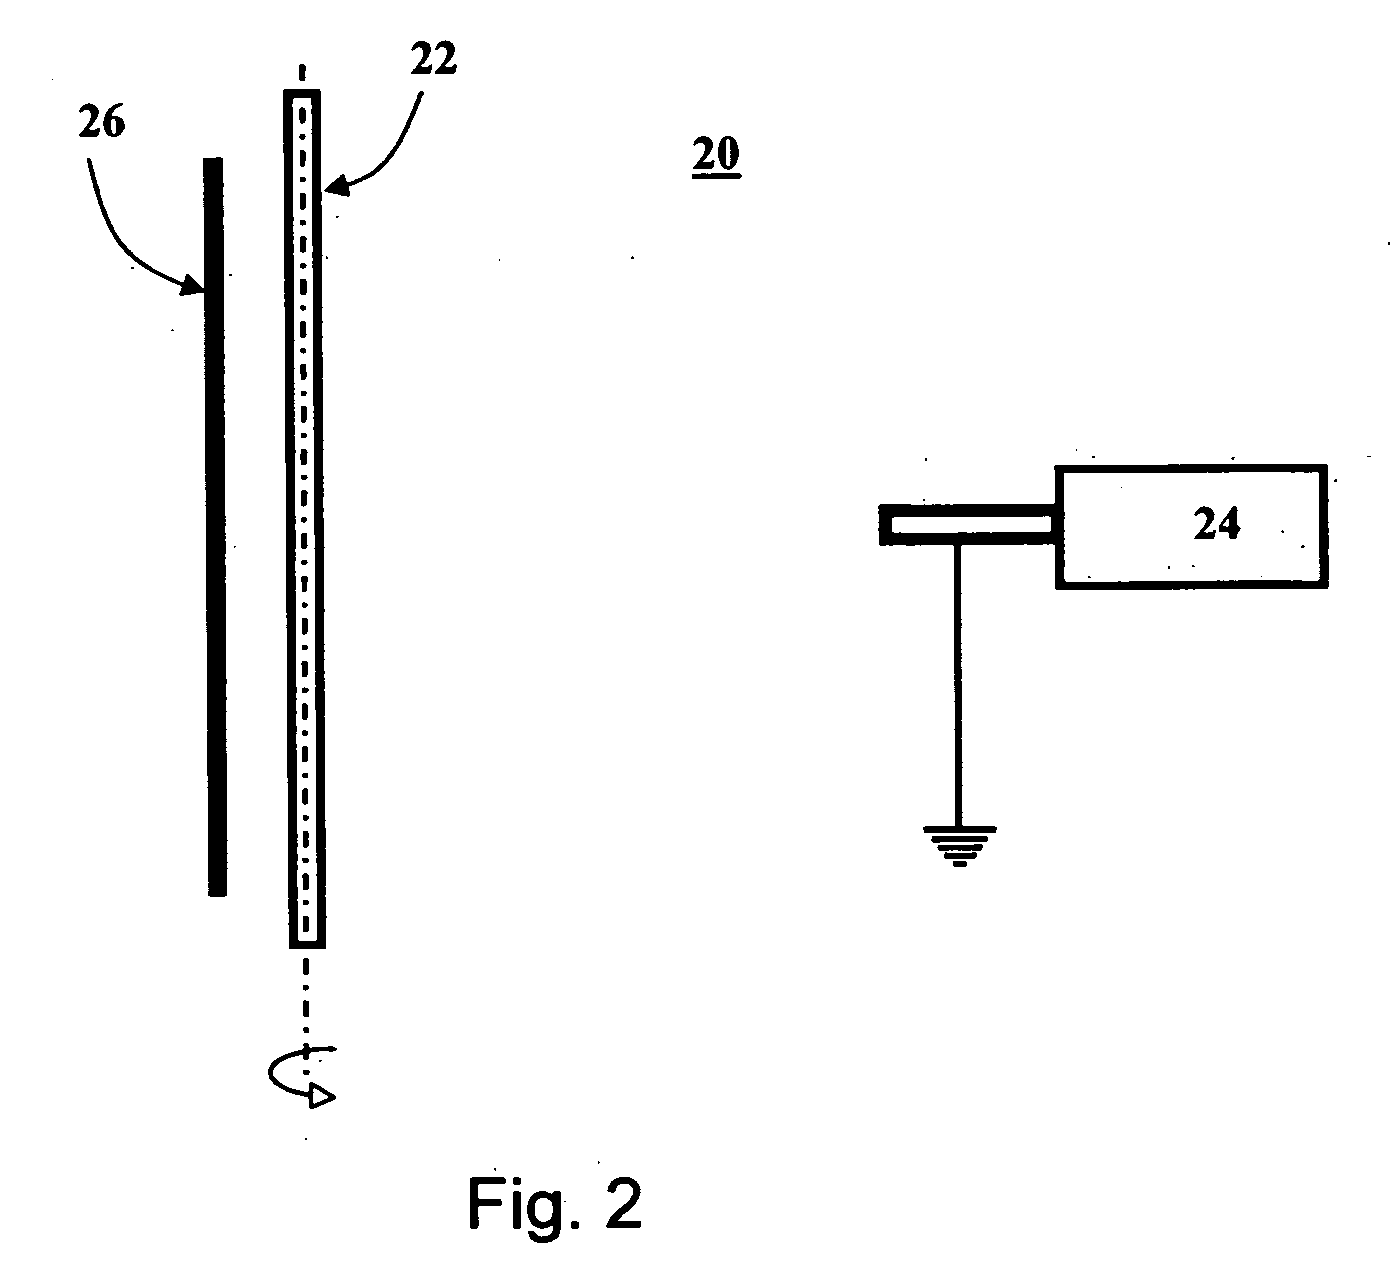 Method and apparatus for coating medical implants